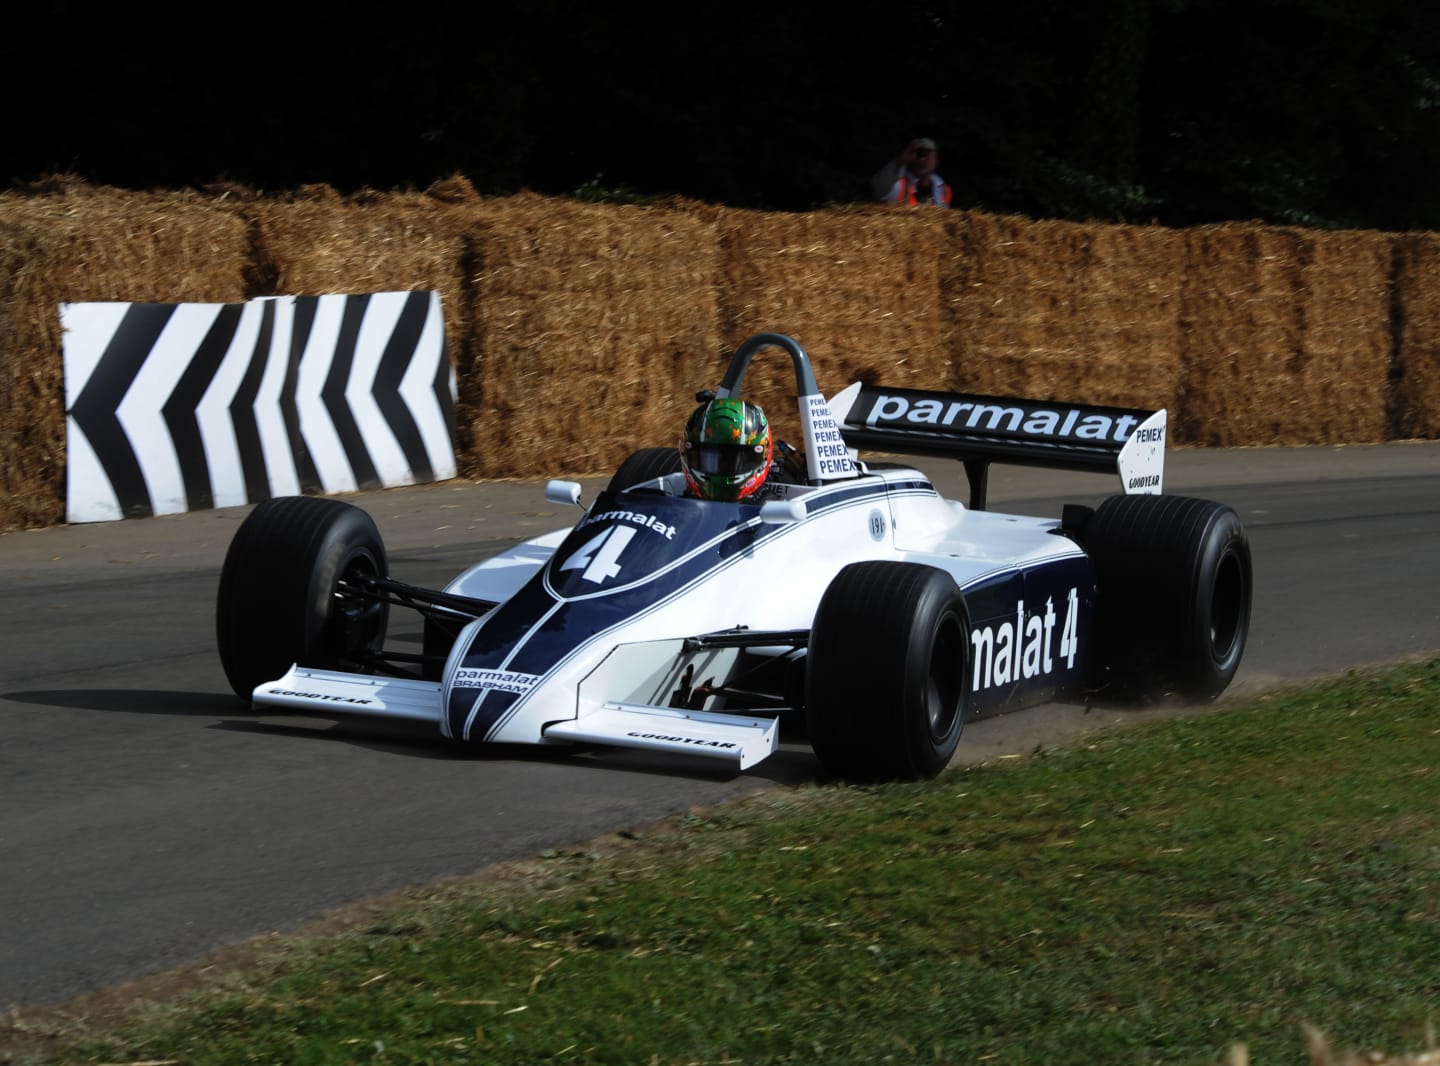 www.sutton-images.com Brabham BT49 at Goodwood Festival of Speed, Goodwood, England, 30 June - 2 July 2017. © Sutton Images